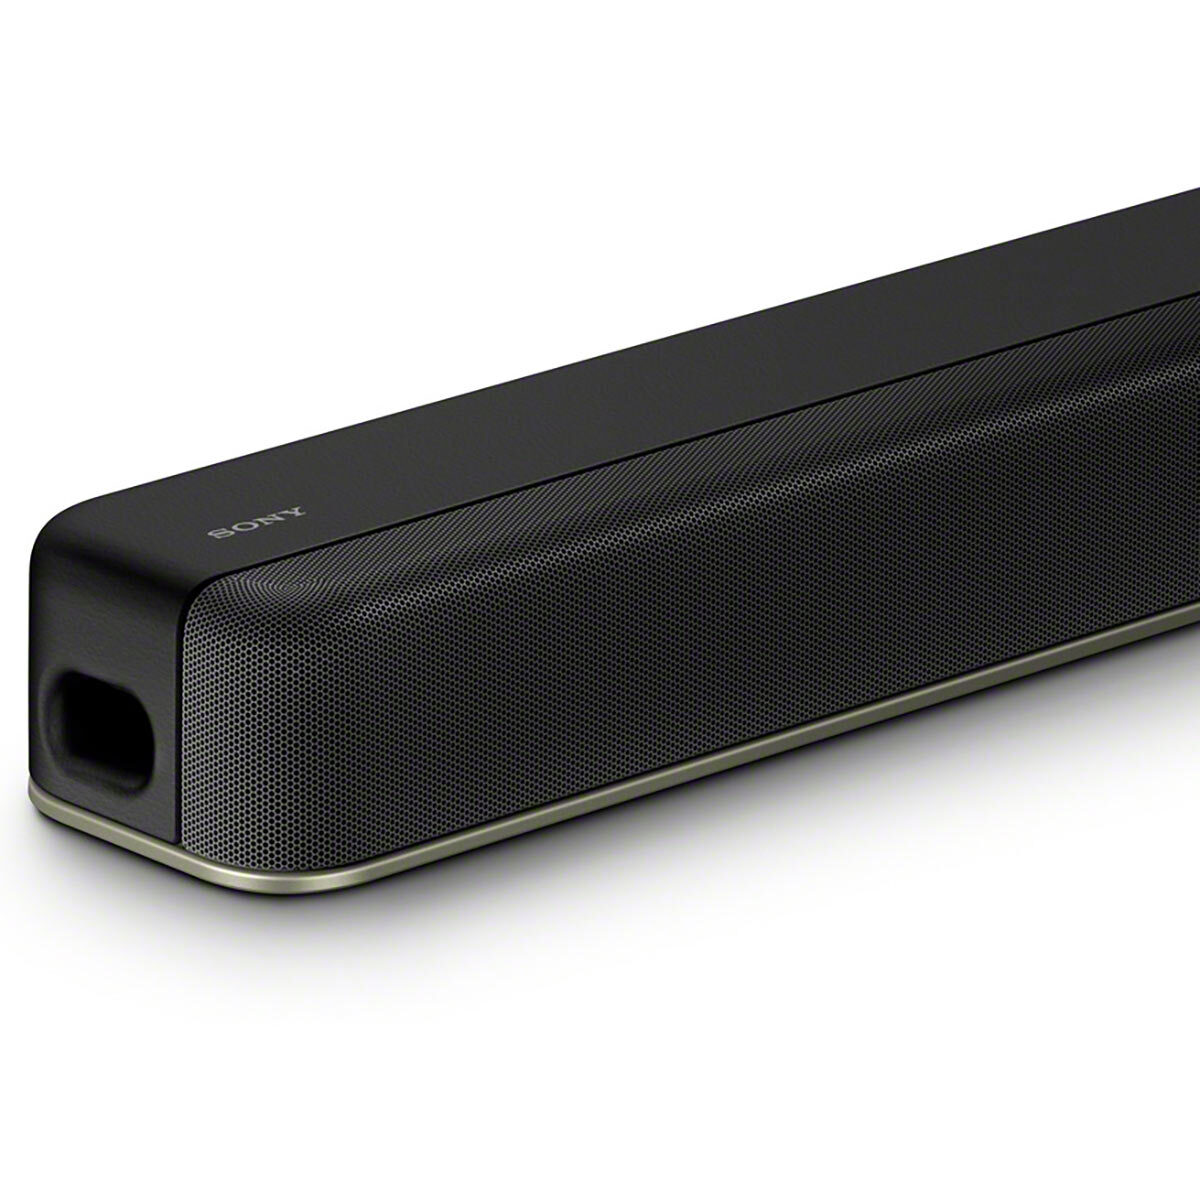 Buy Sony HTX8500, 2.1 Ch, 320W, Soundbar with Built-in Subwoofer and Bluetooth, HTX8500.CEK at Costco.co.uk